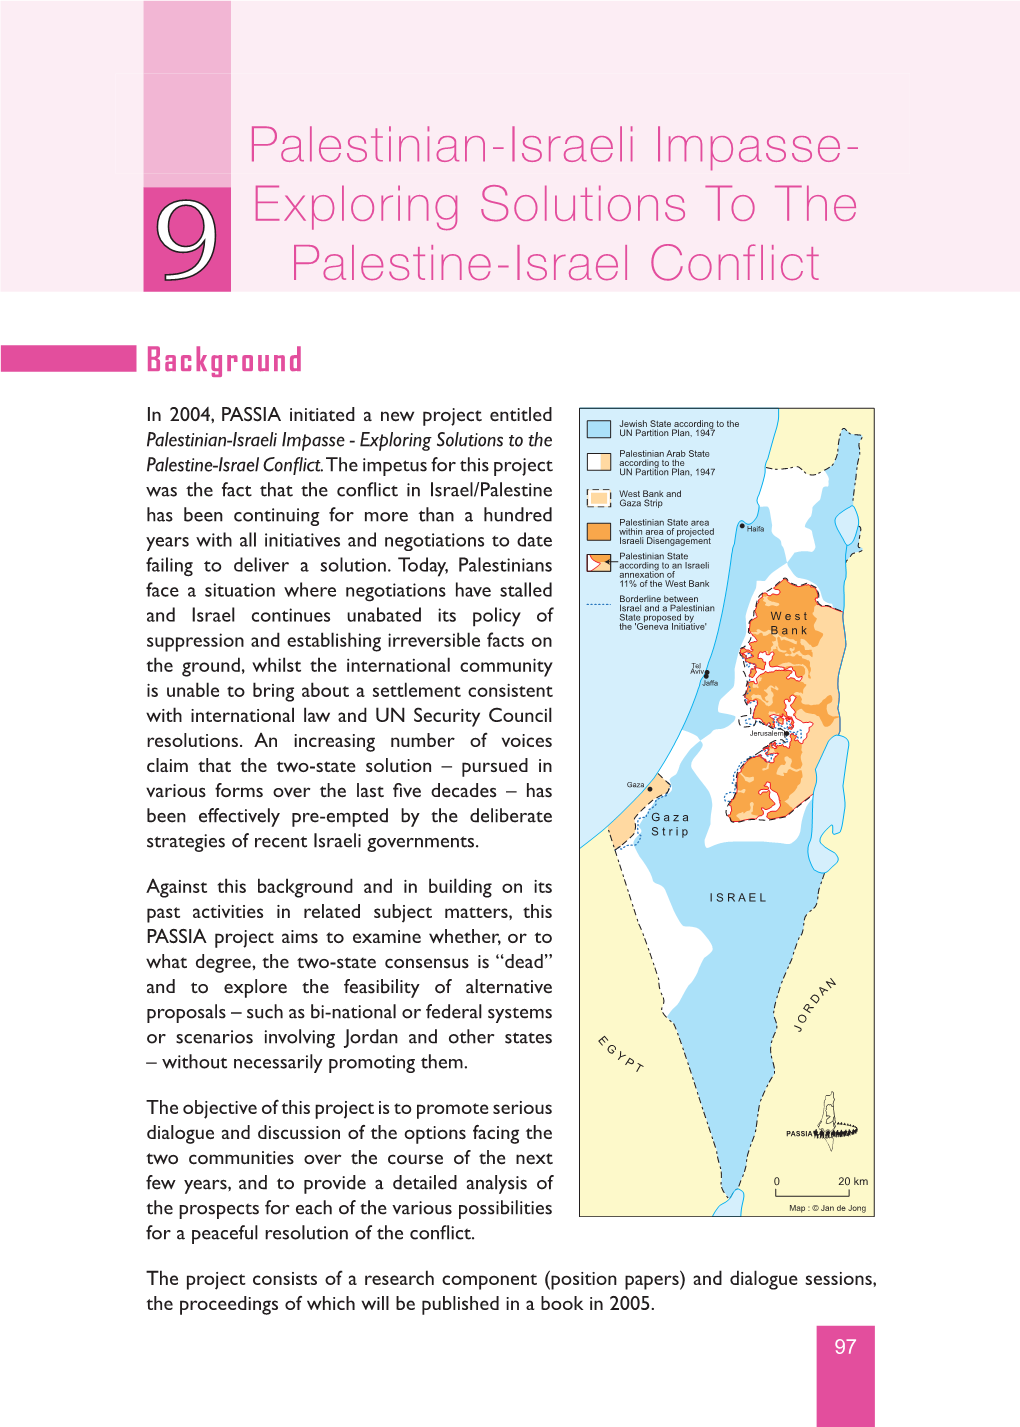 Palestinian-Israeli Impasse- Exploring Solutions to the Palestine-Israel Conflict